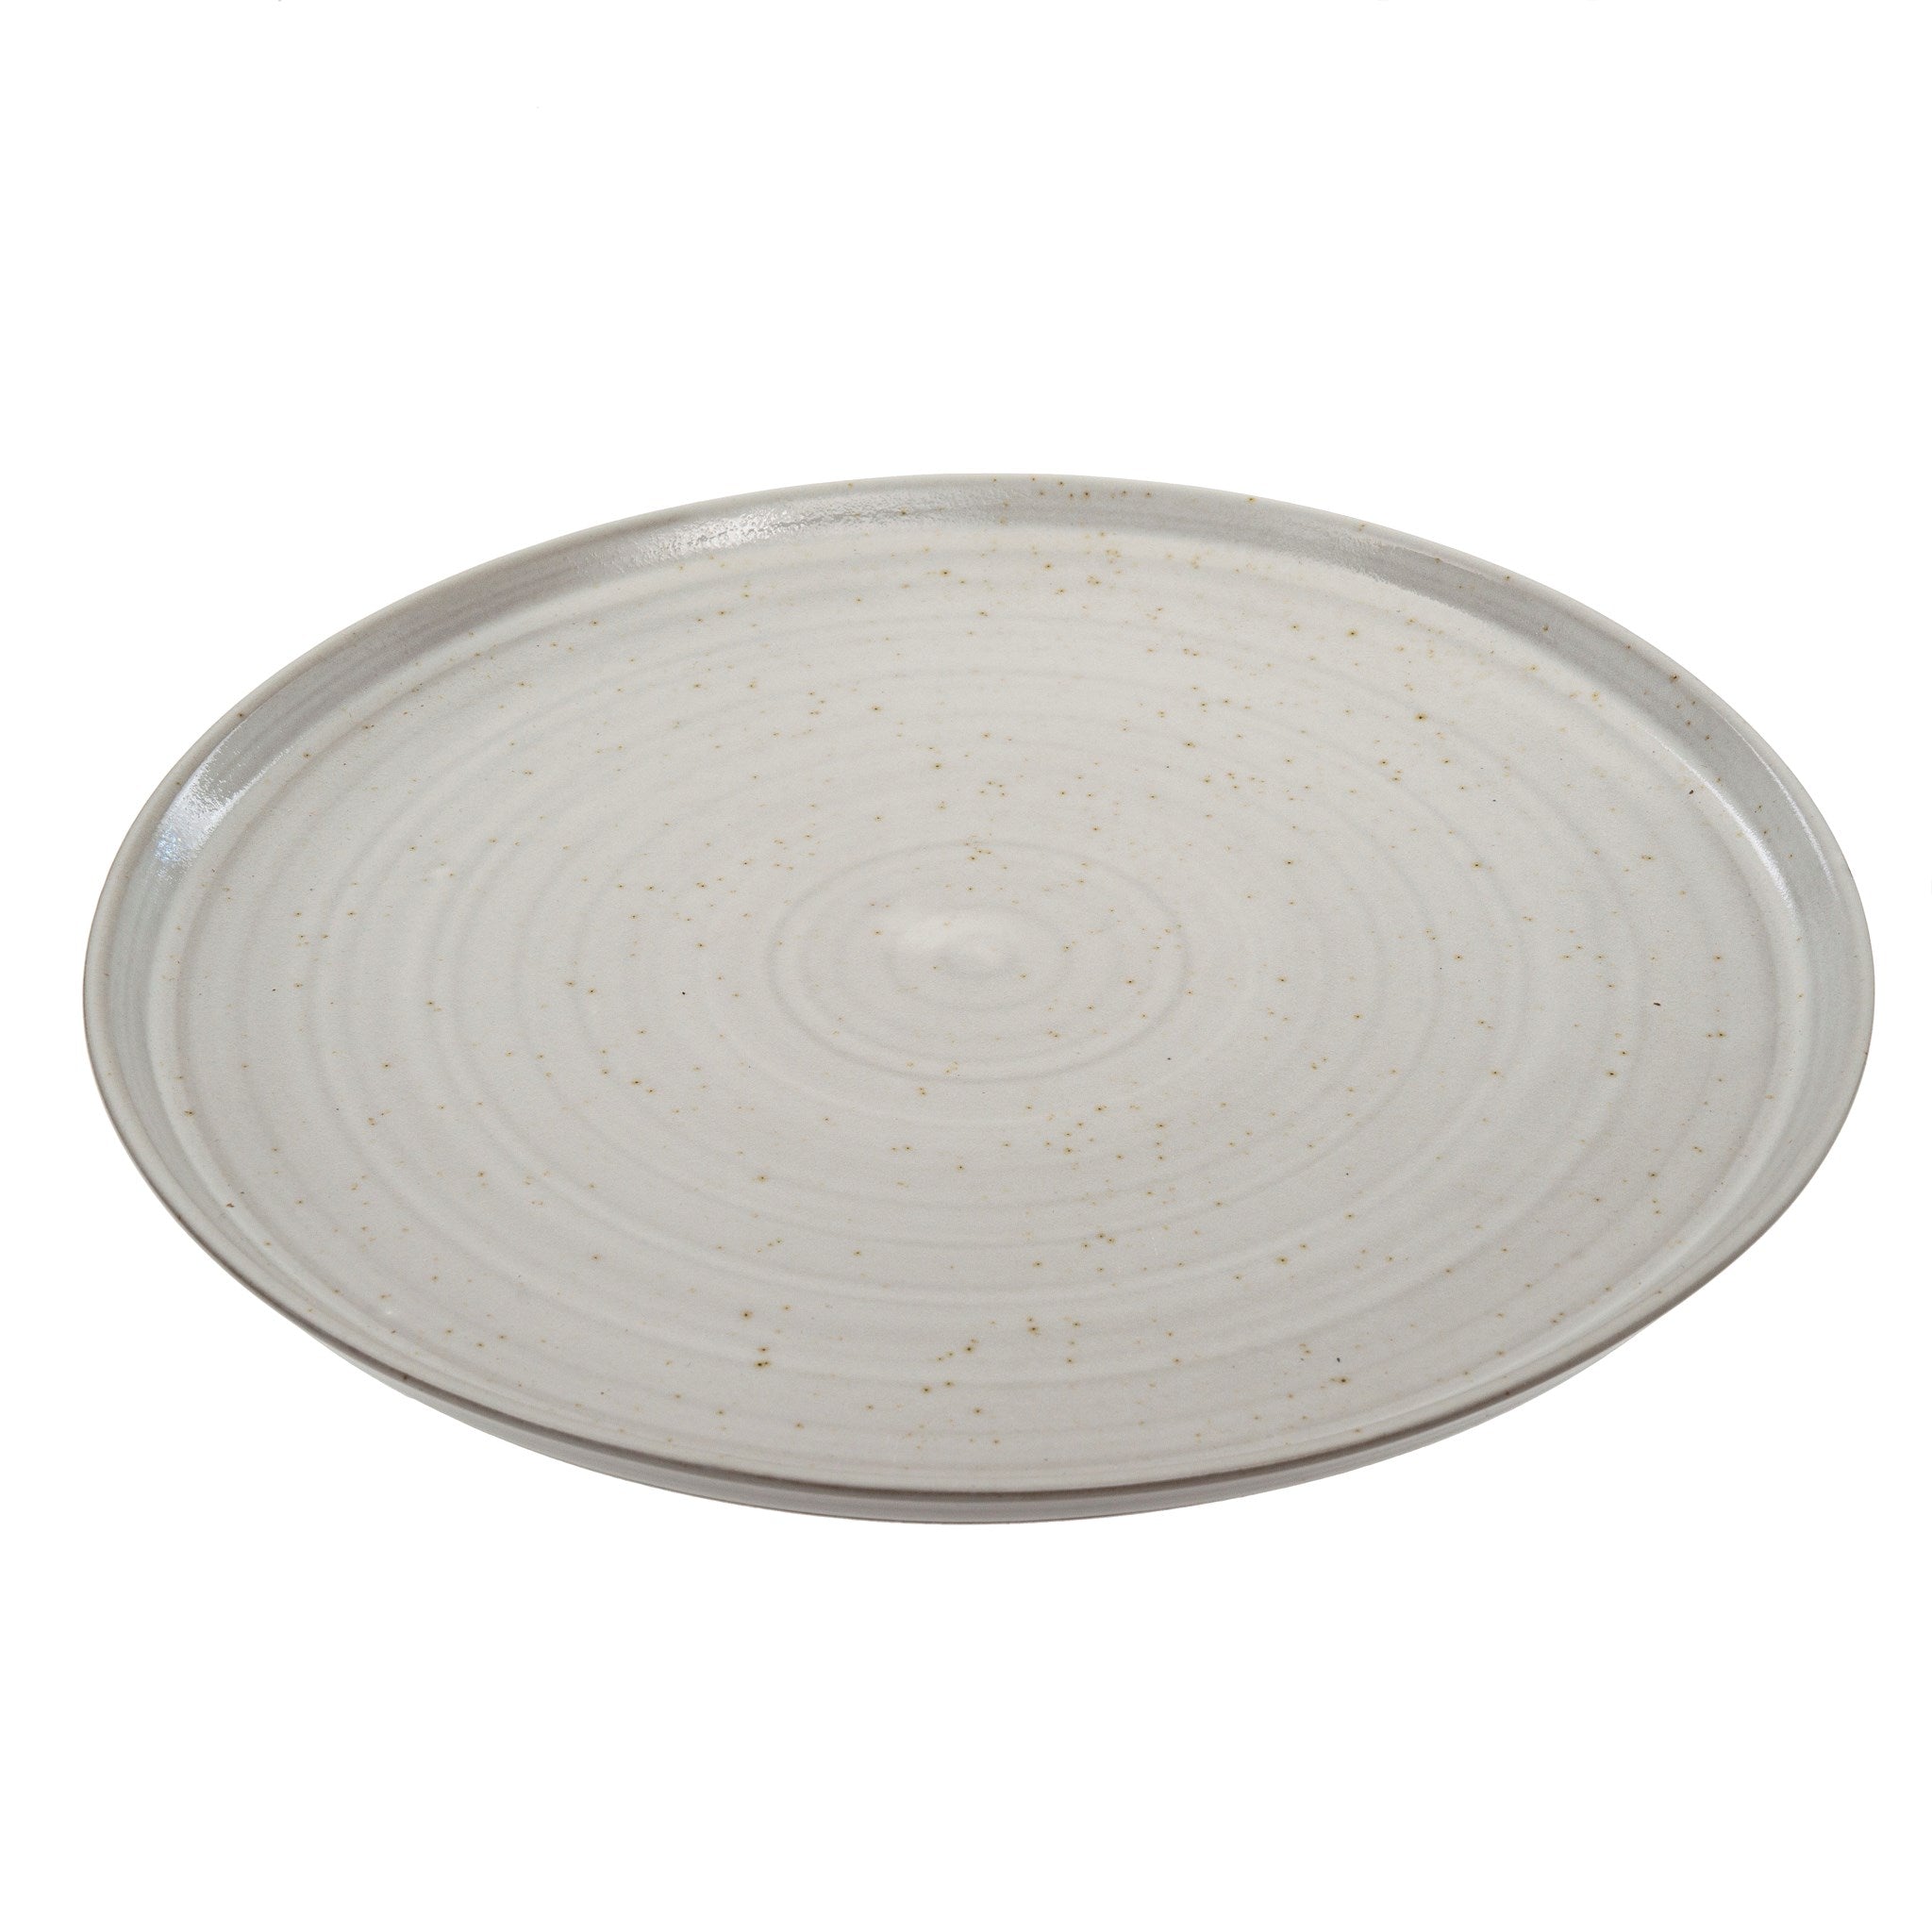 Canyon Dinner Plate, Set of 4